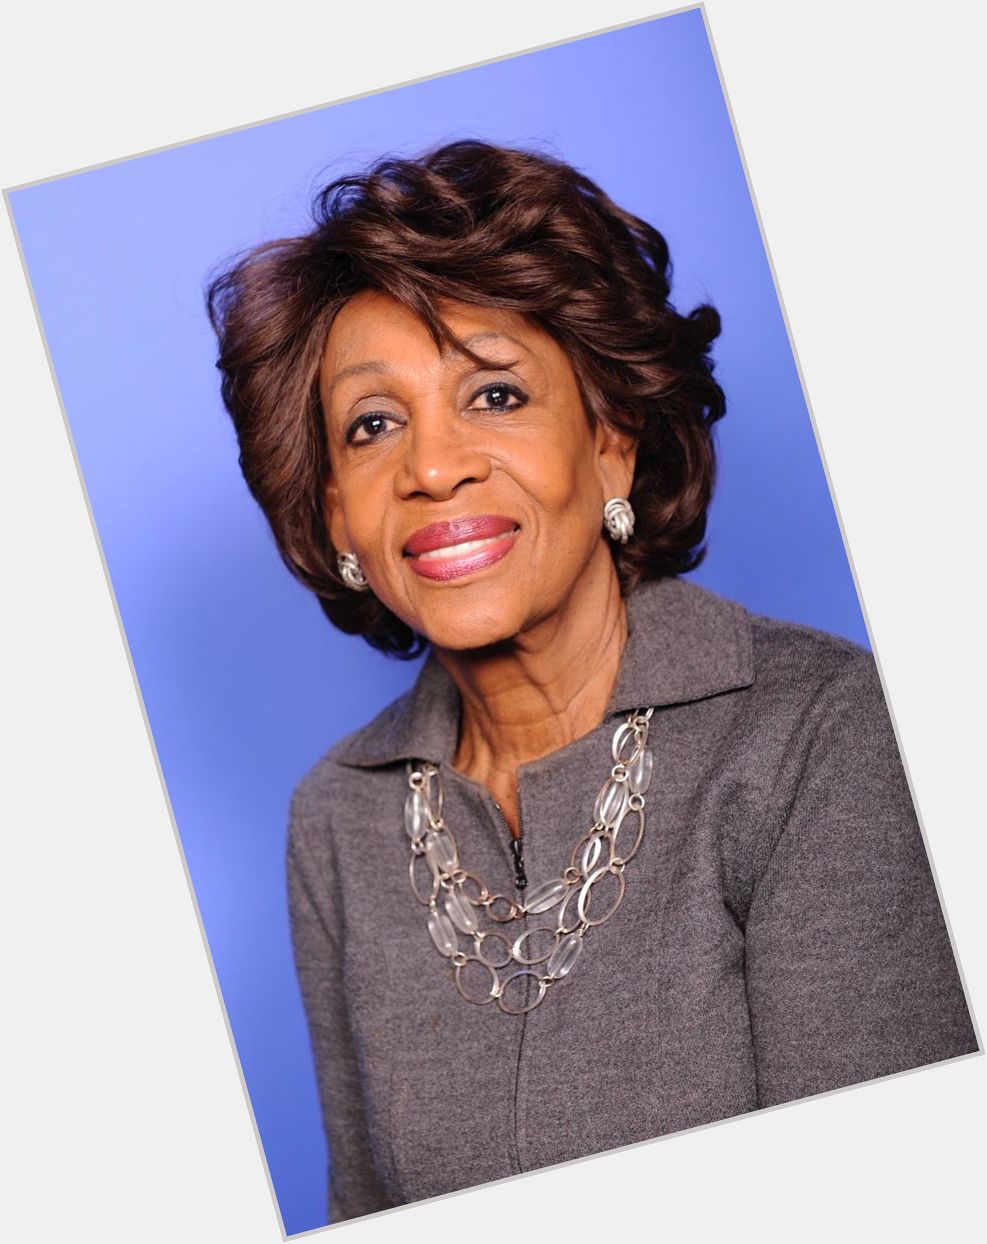 Happy Birthday to Rep. Maxine Waters! 